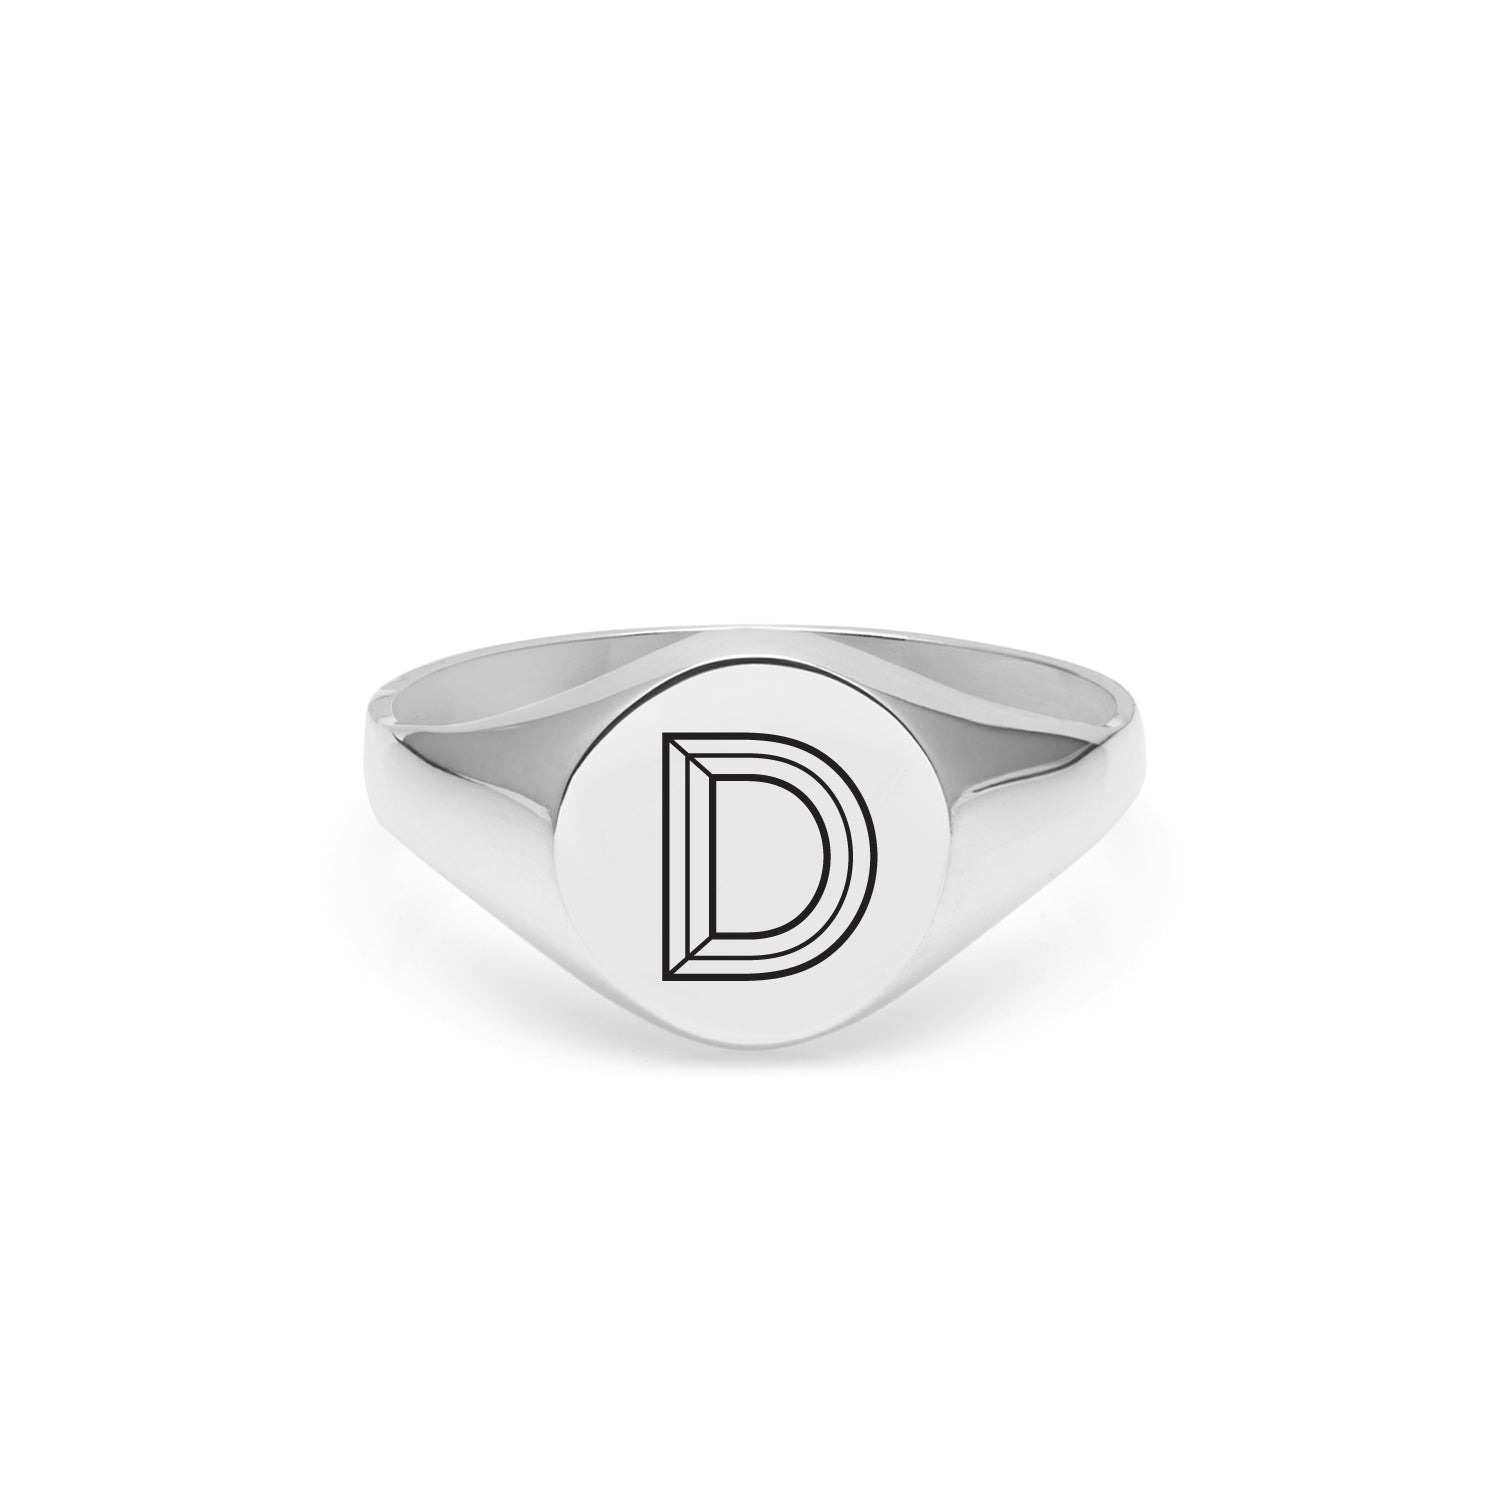 Facett Initial D Round Signet Ring - Silver - Myia Bonner Jewellery